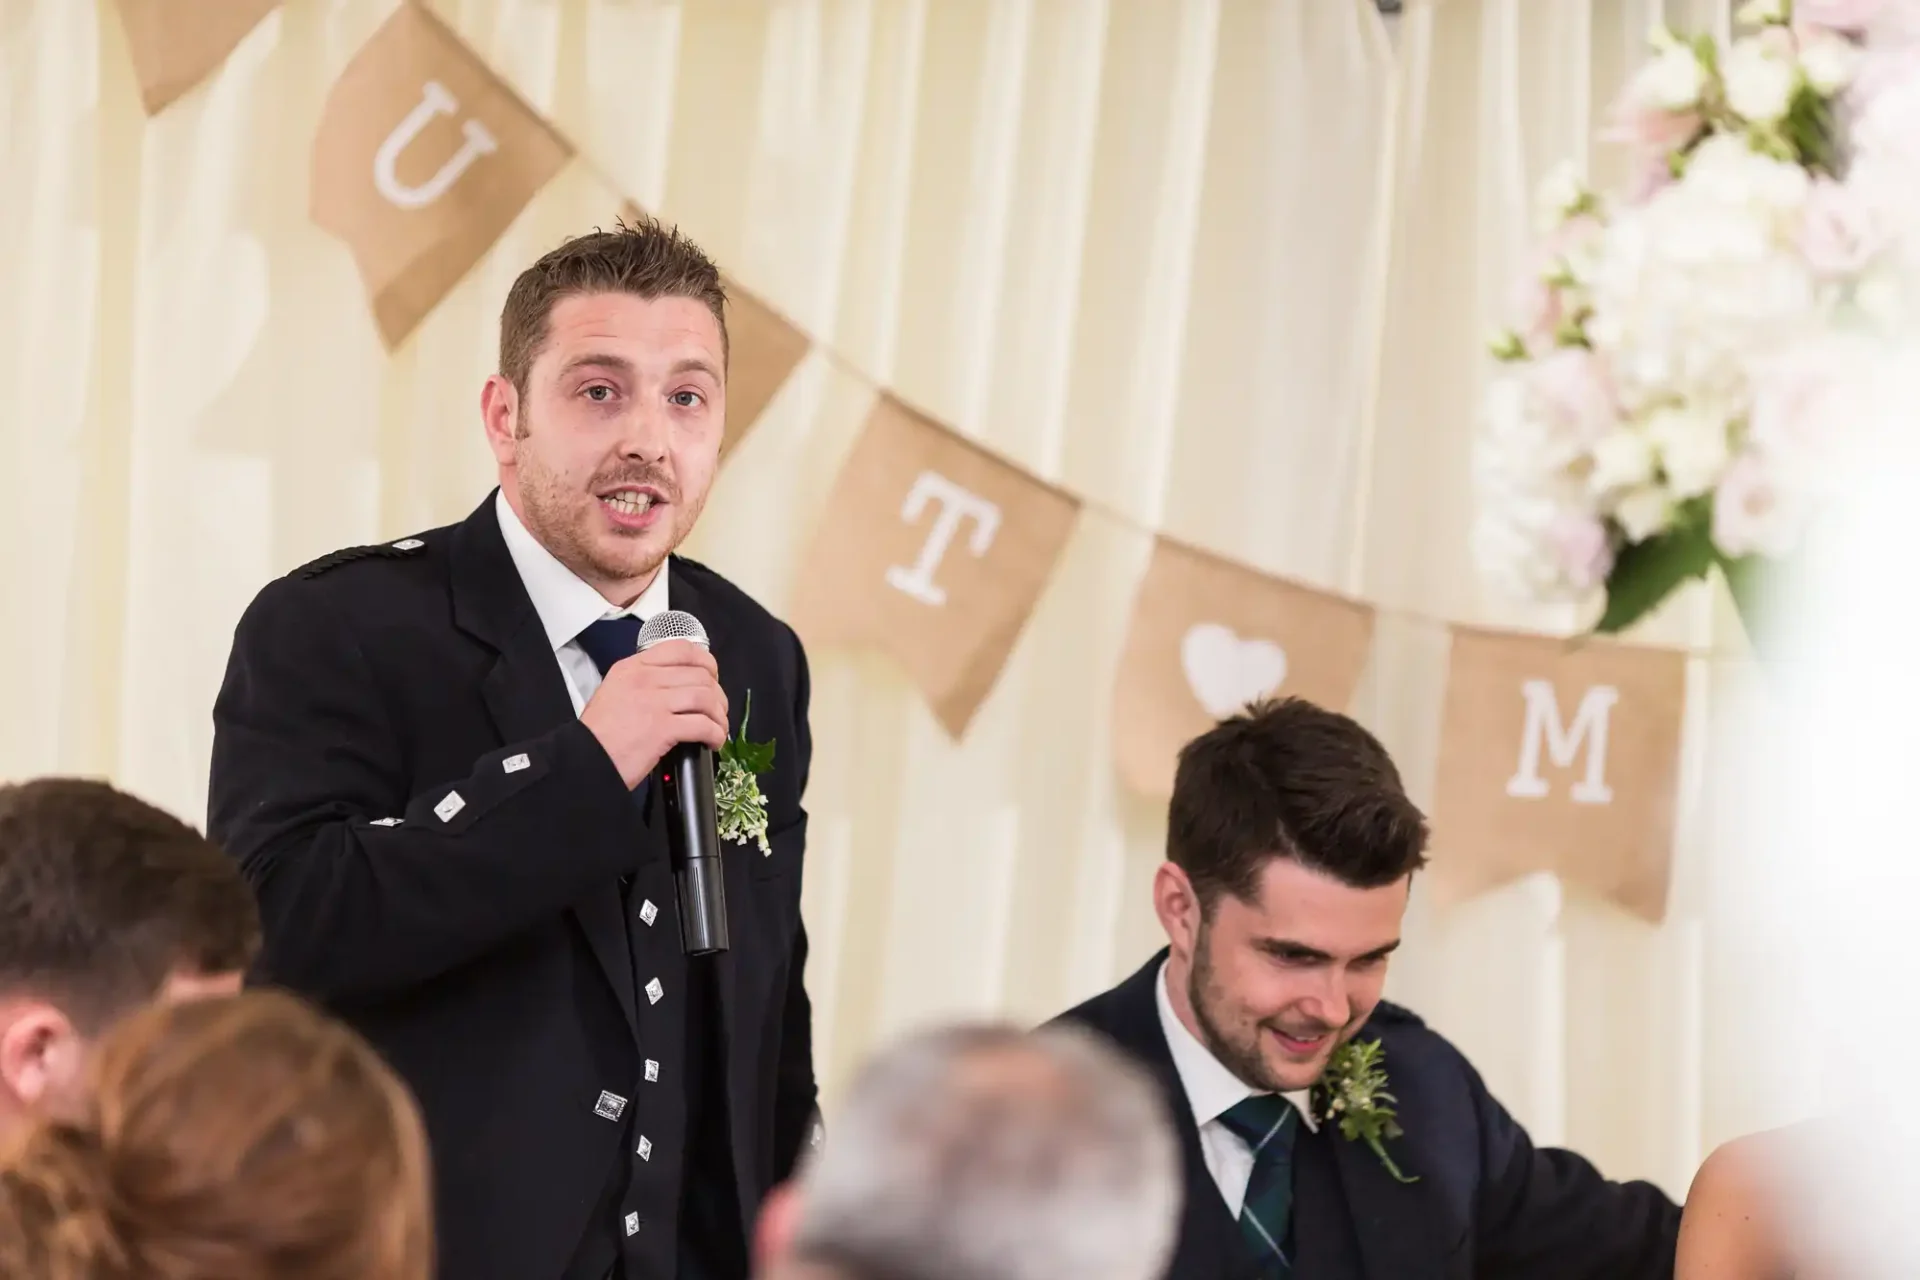 A man in a formal uniform giving a speech with a microphone at a wedding reception, another man smiling at him from a table.